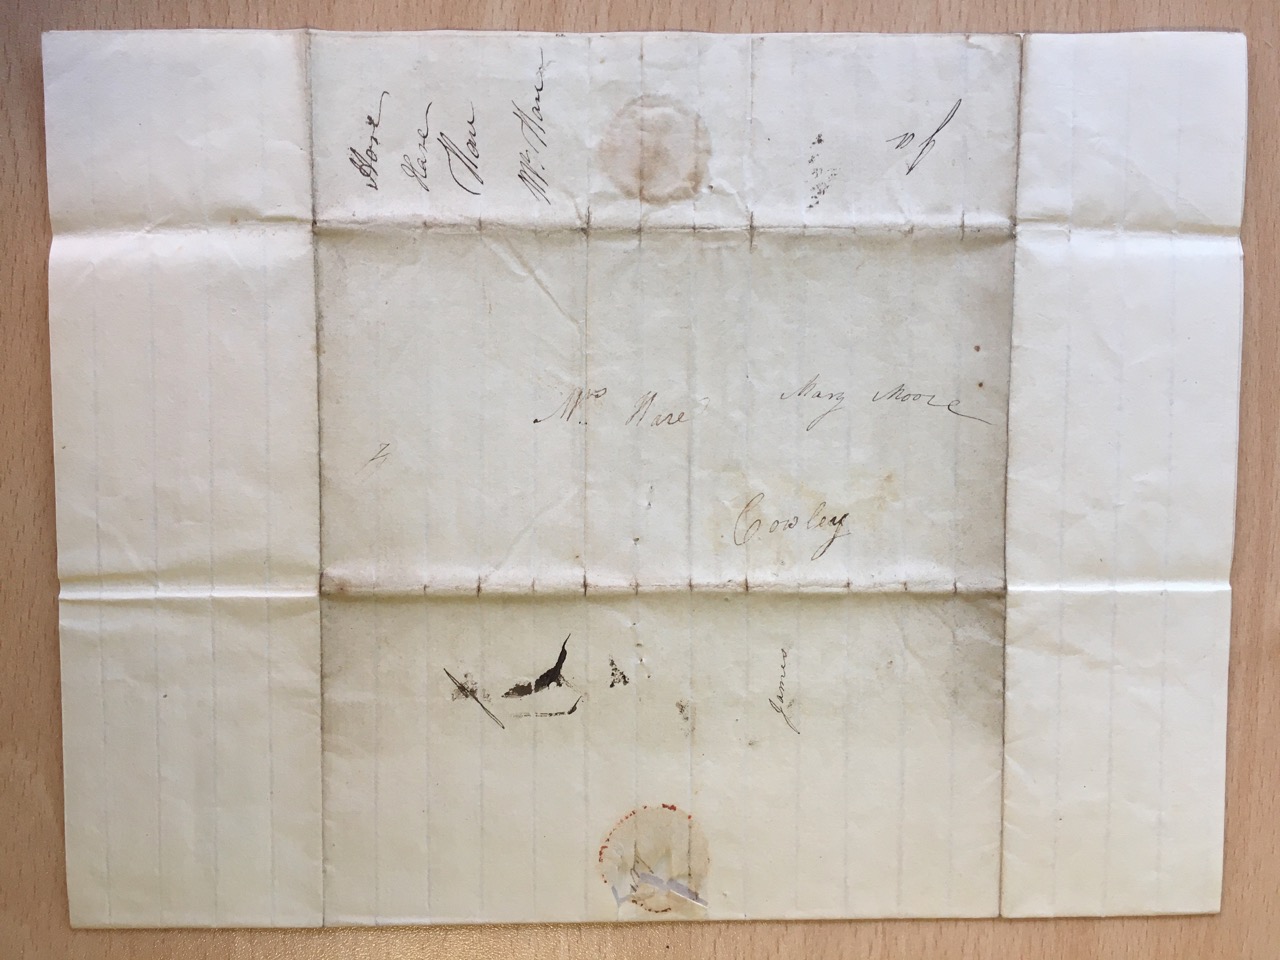 Image #3 of letter: Mary Moore to Ann Hare, cNov c1780